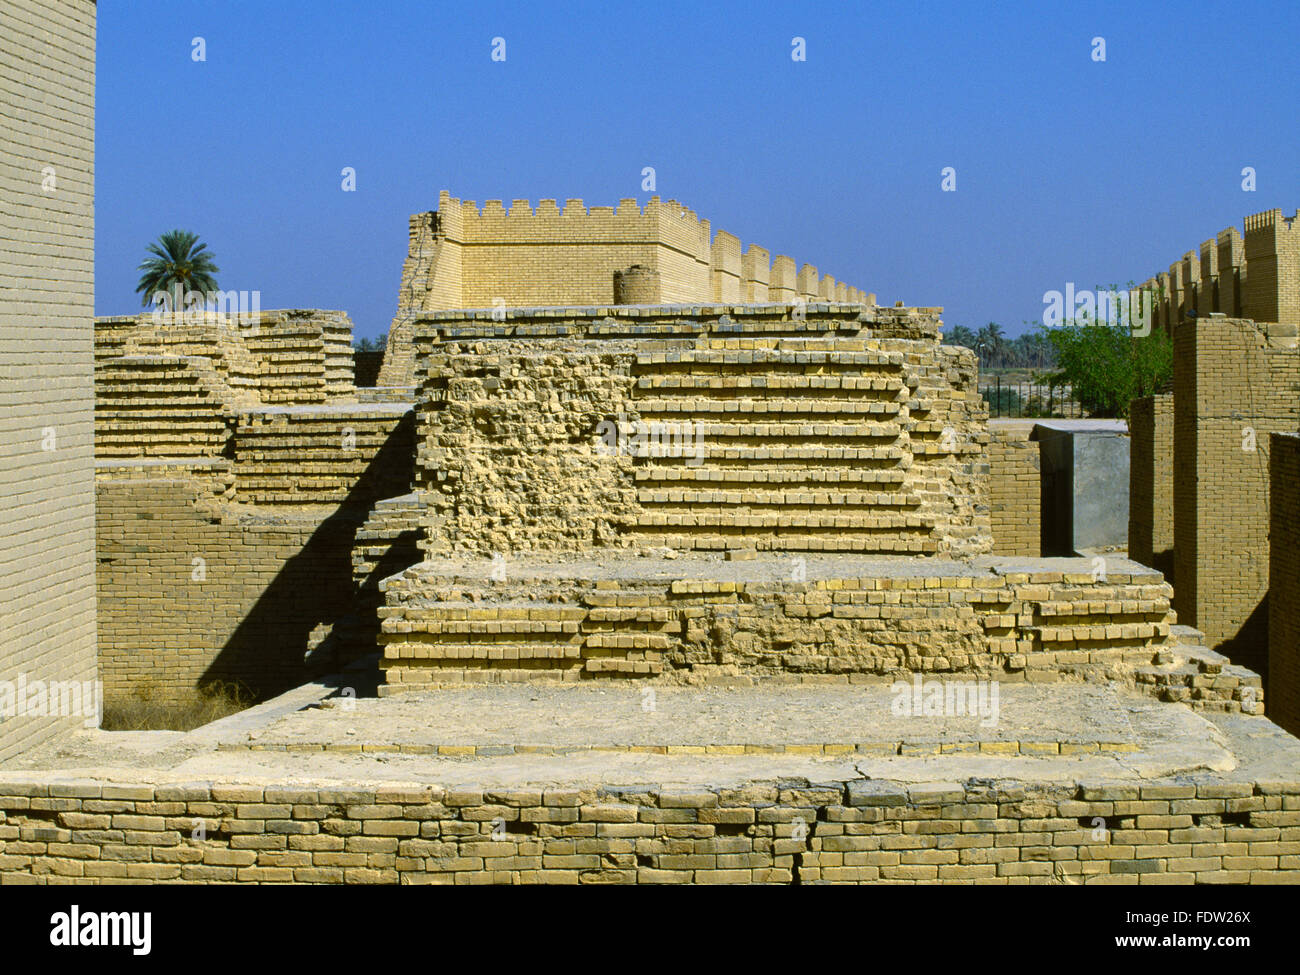 Babylon Iraq Thought To Be The Site Of The Hanging Gardens Of